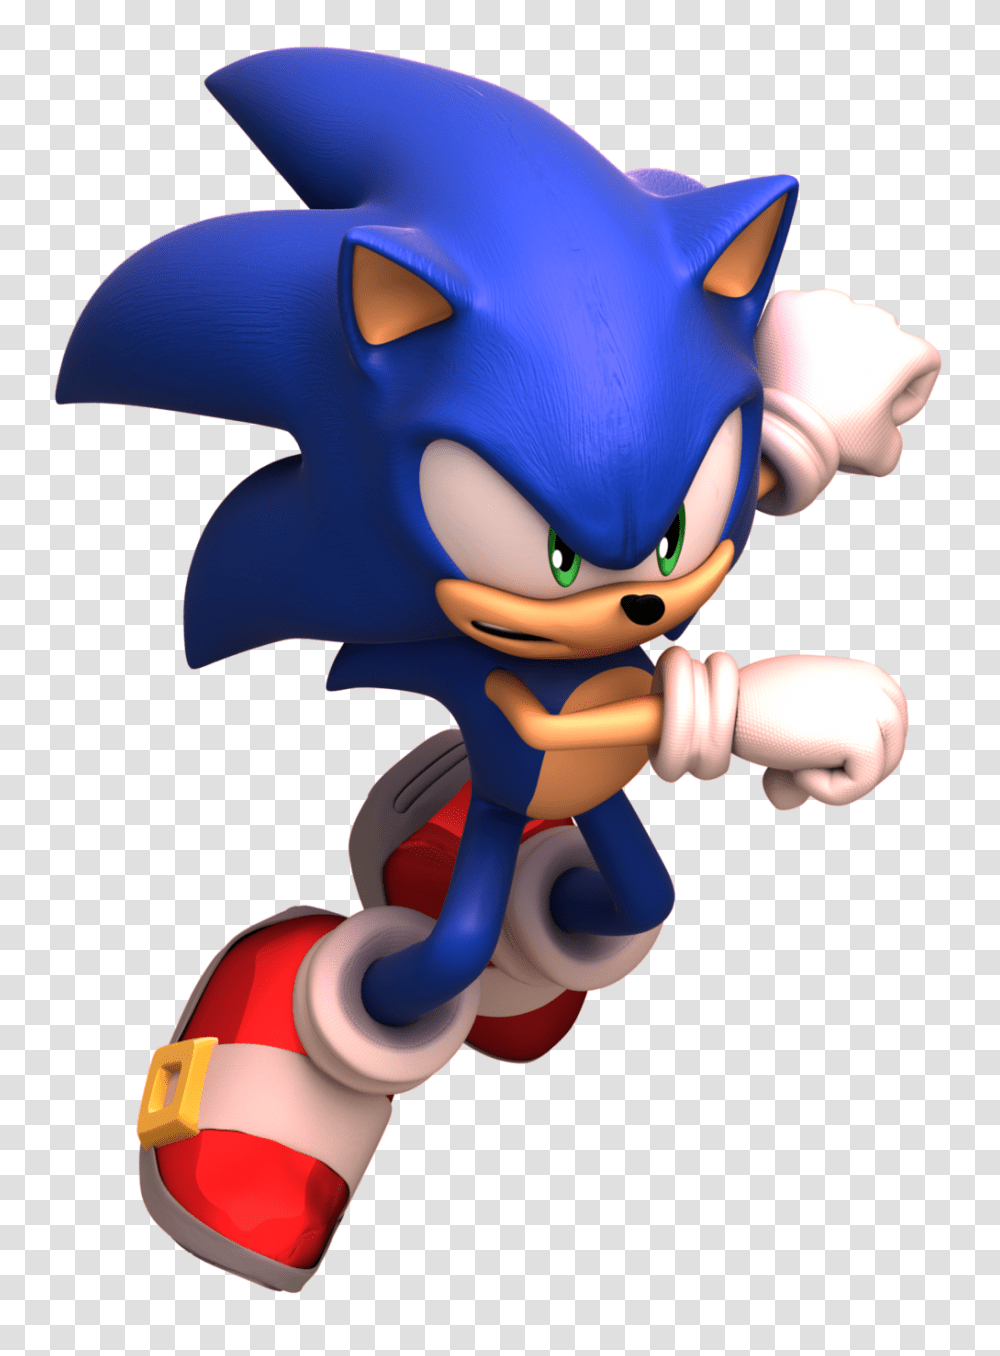 Group Of Sonic Running Pose Render, Toy, Figurine Transparent Png